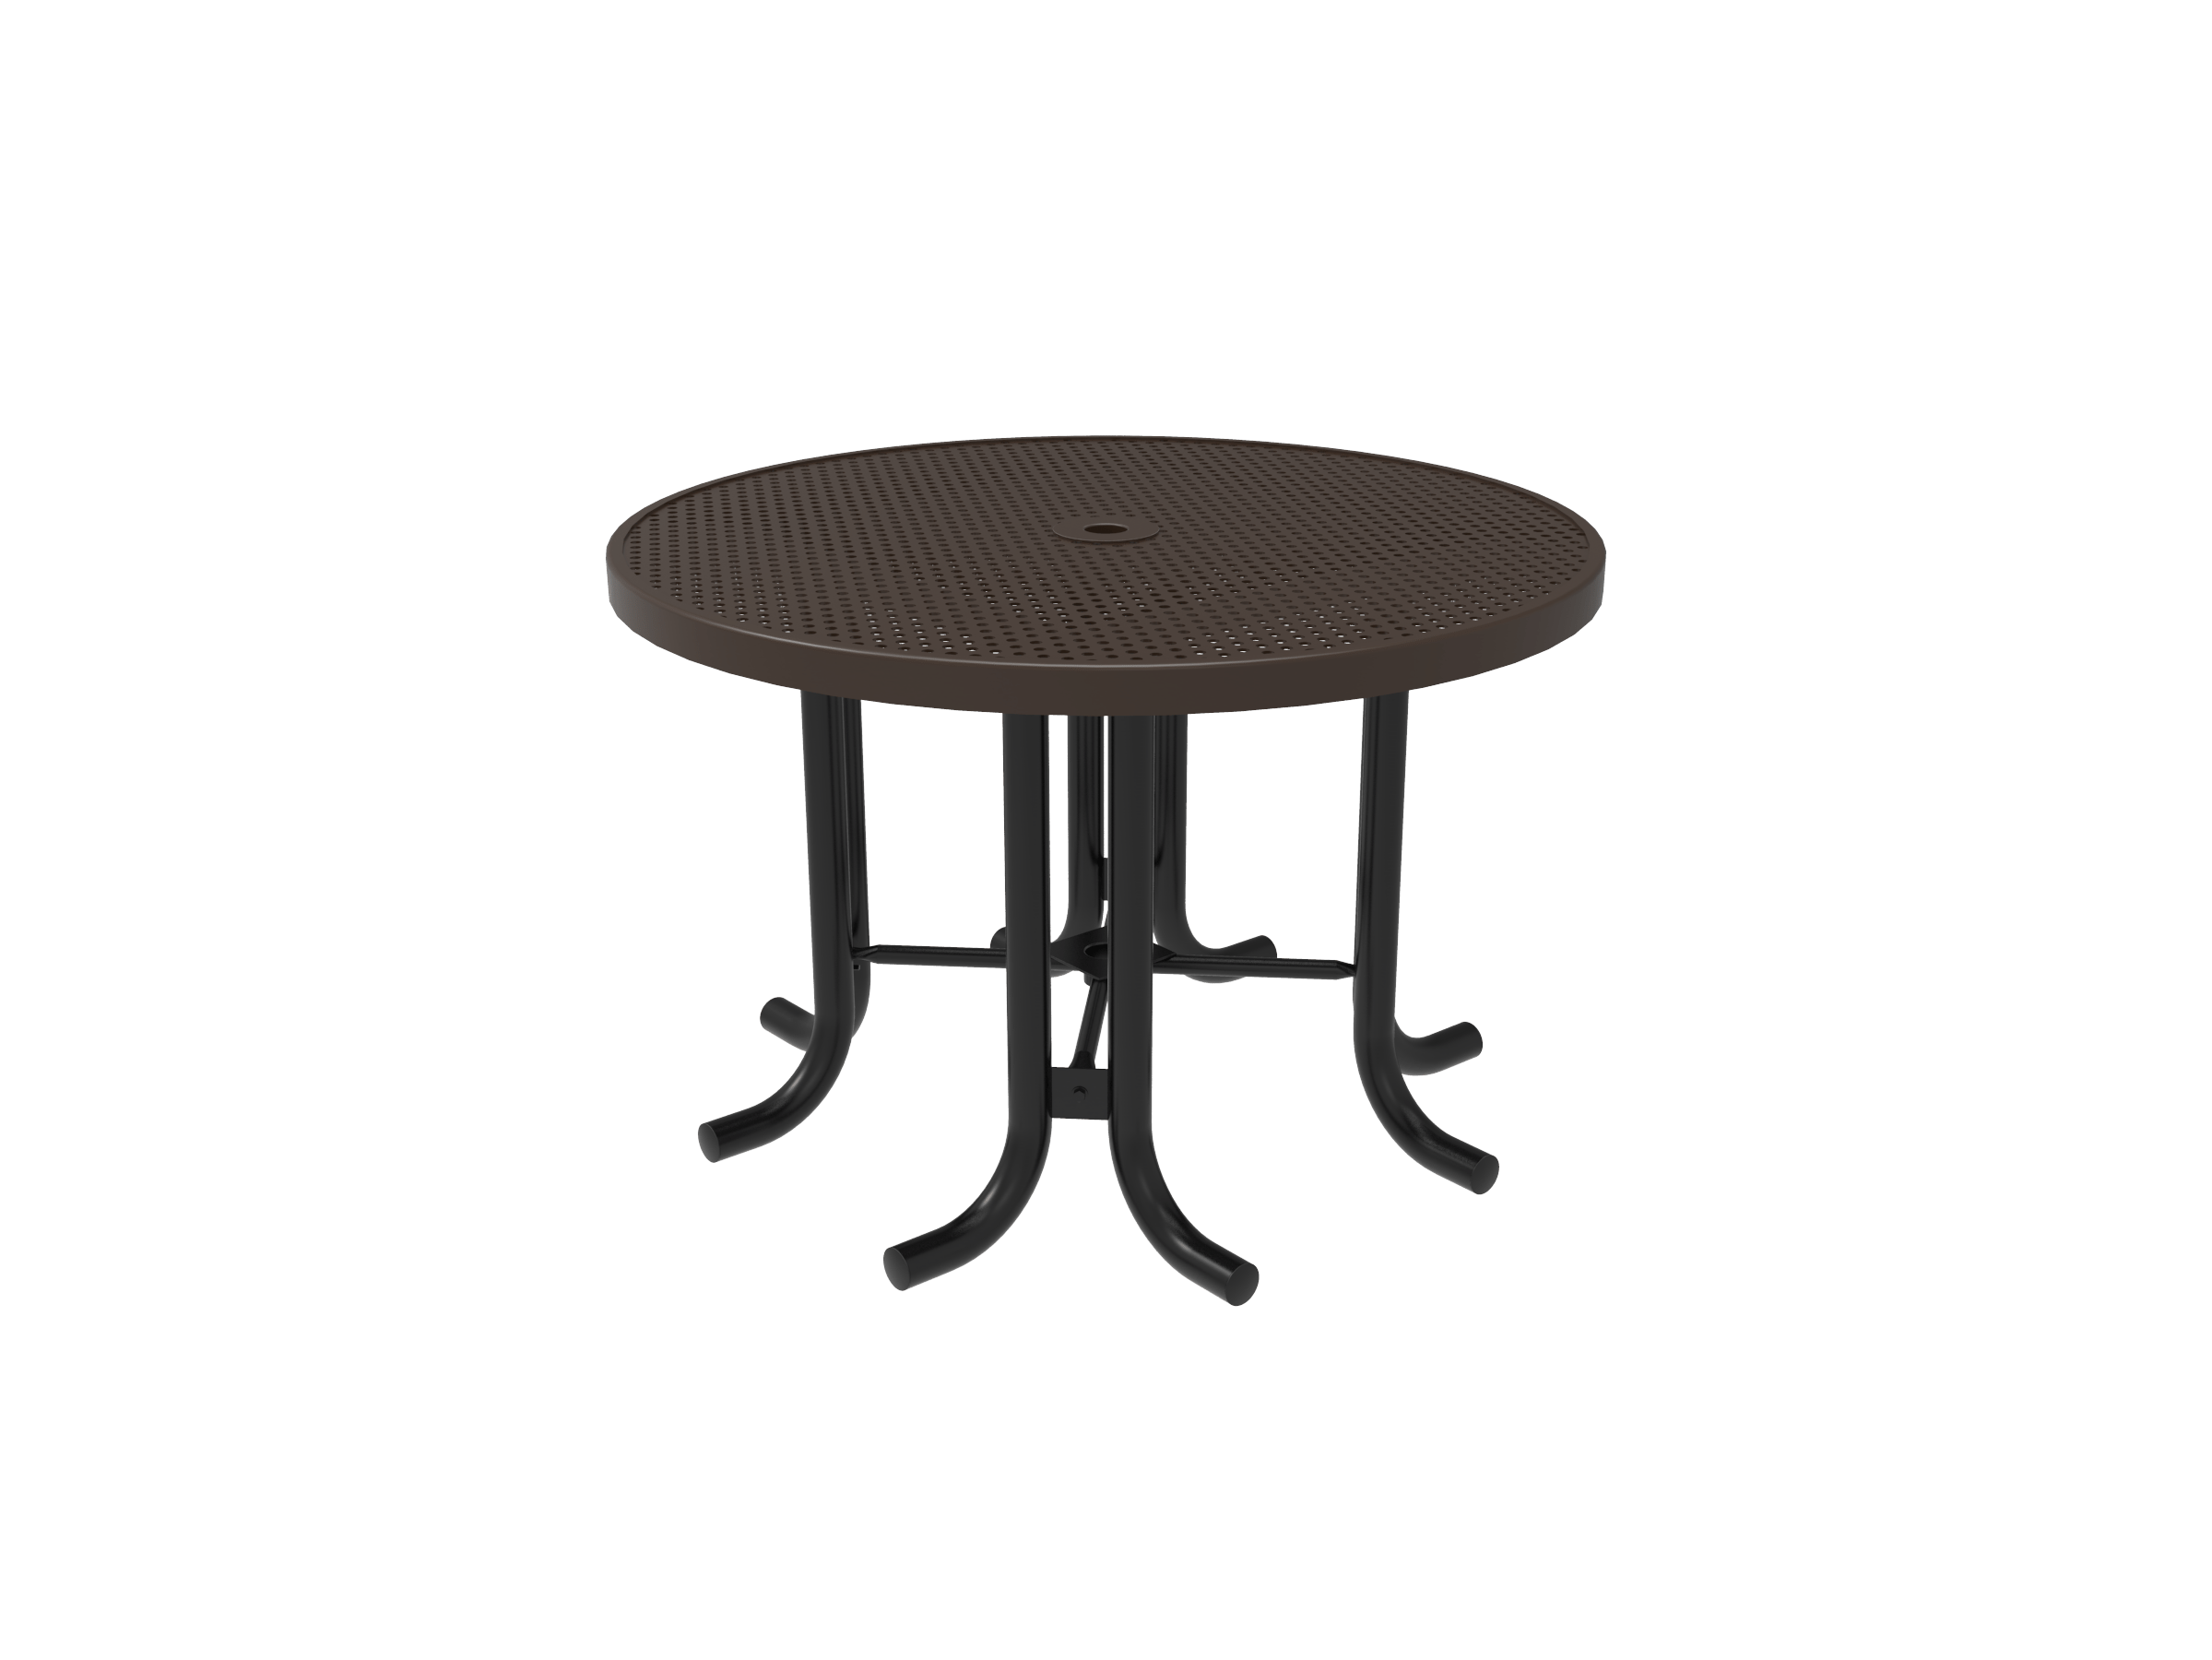 46″ Round Table-Punched
TPR46-D-66-000
Industry Standard Finish
$749.00
TPR46-B-66-000
Advantage Premium Finish
$979.00
